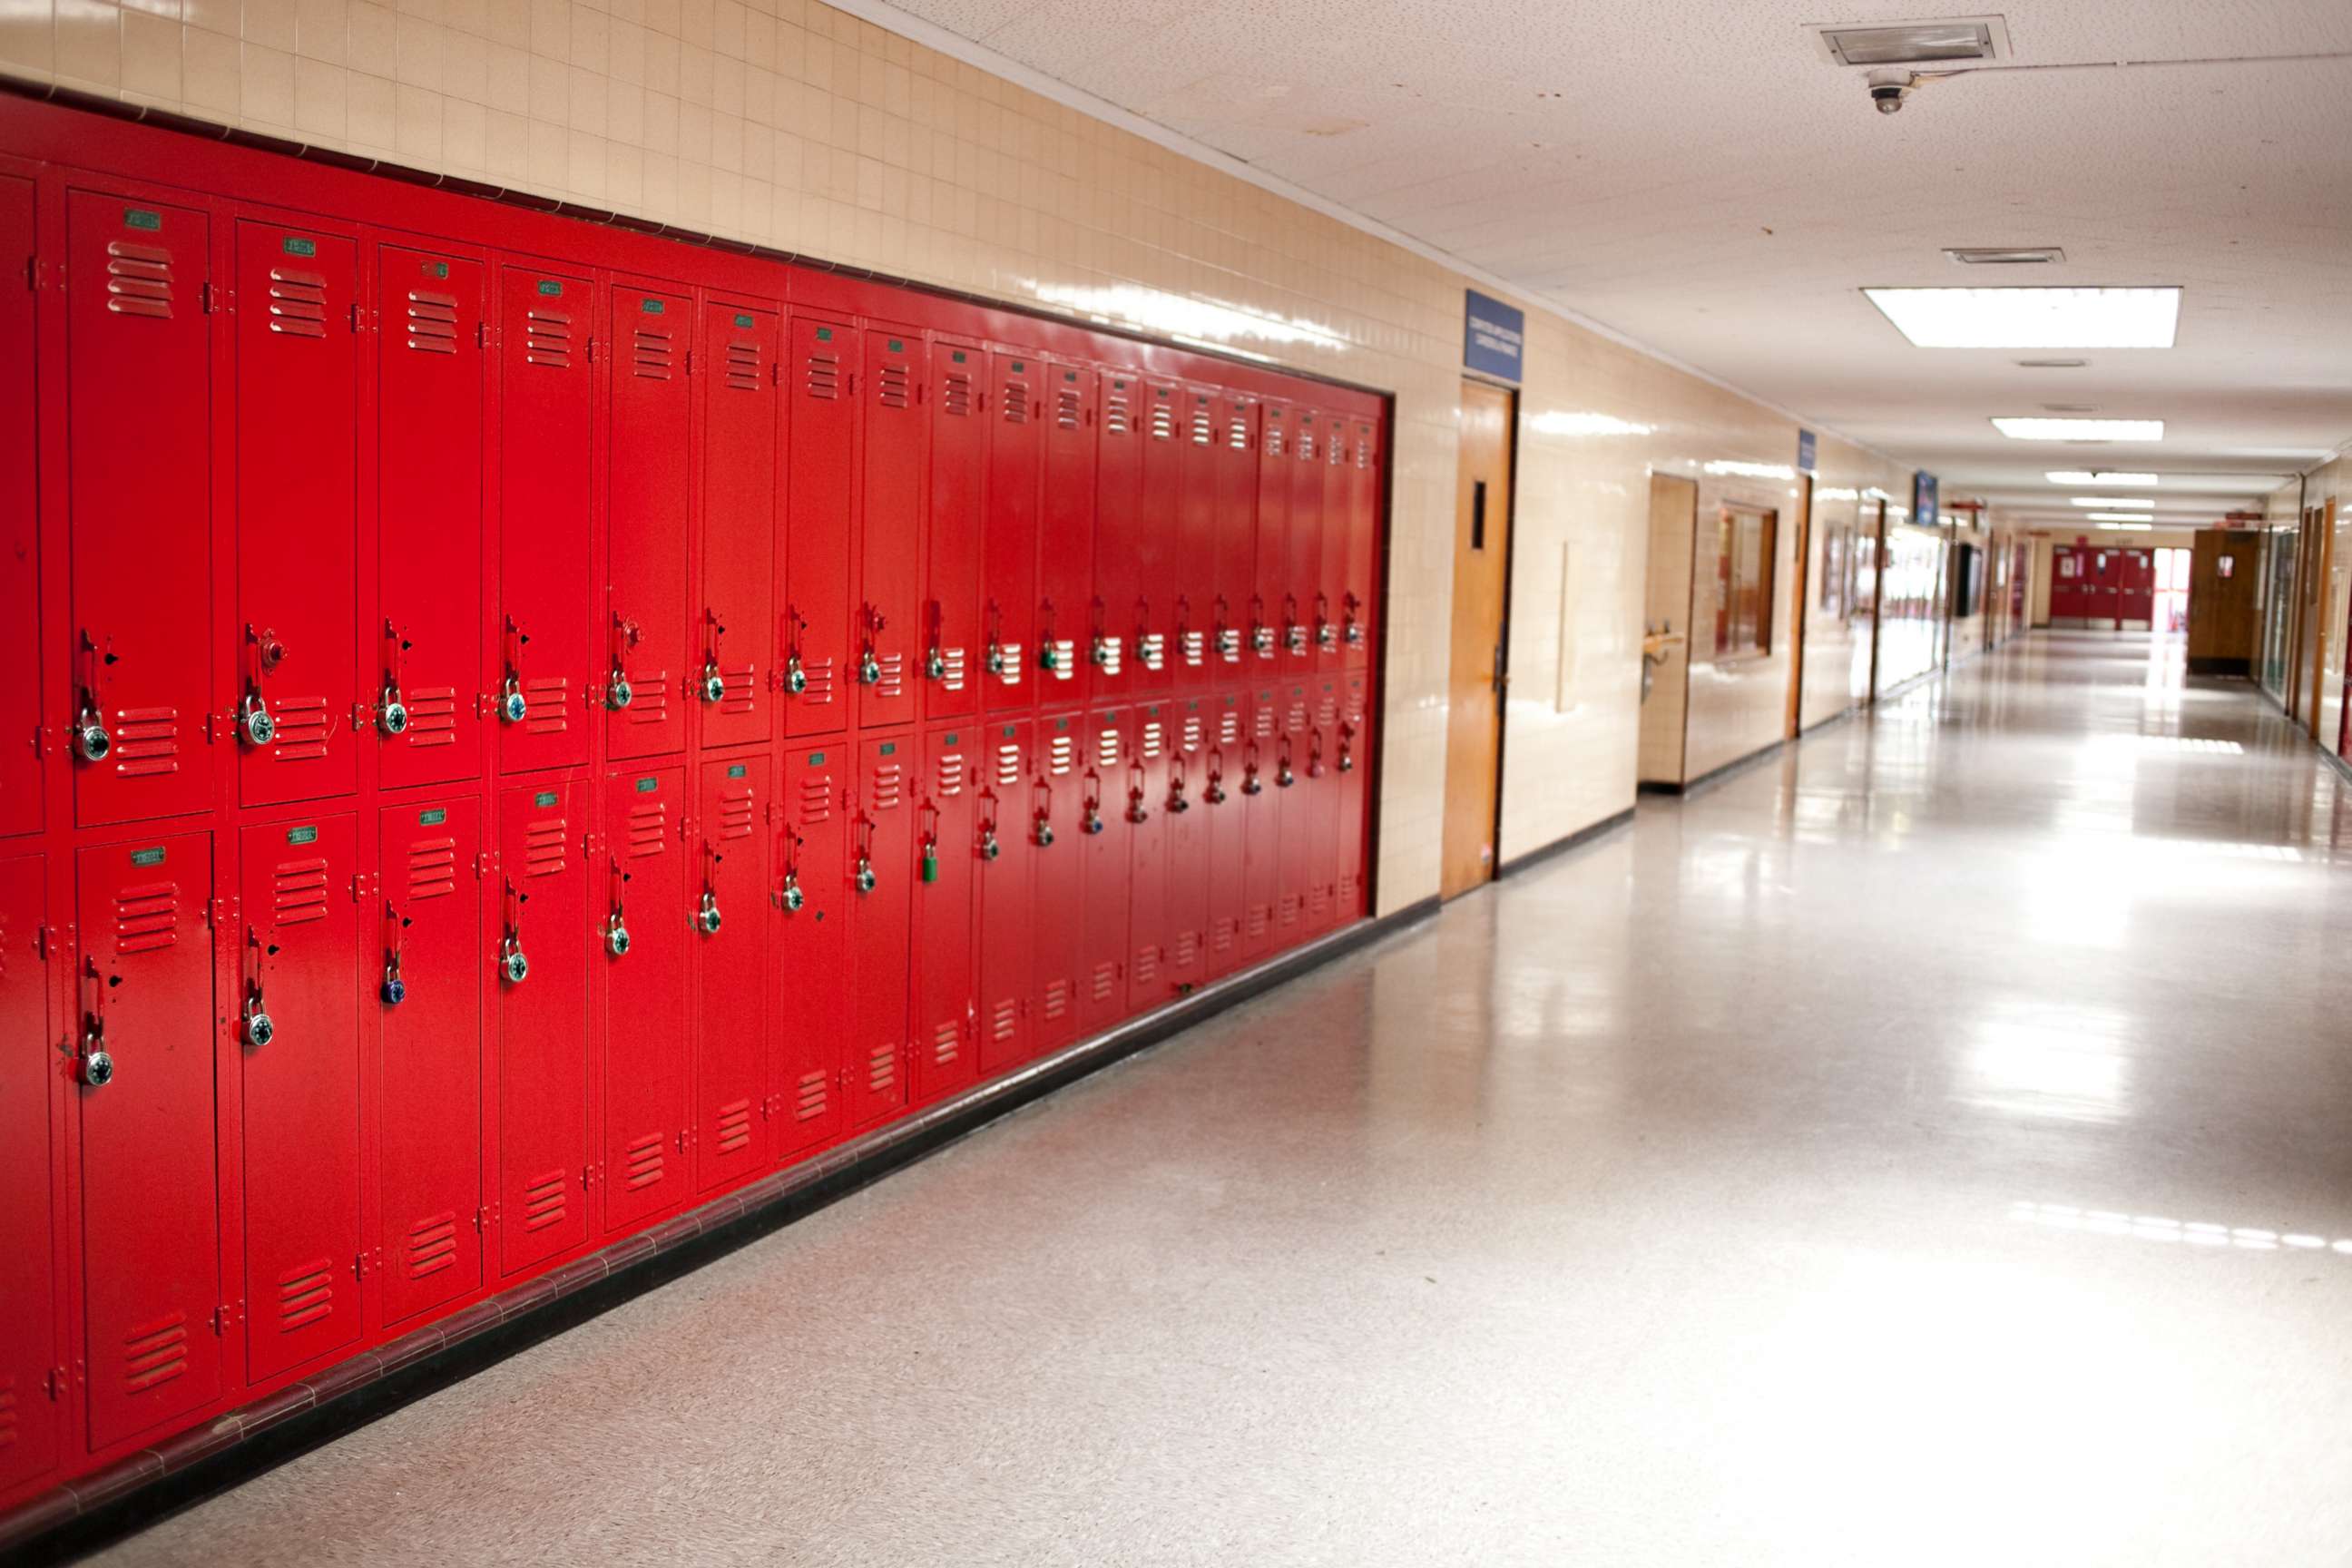 PHOTO: In this undated file photo, lockers in a high school hallway are shown.